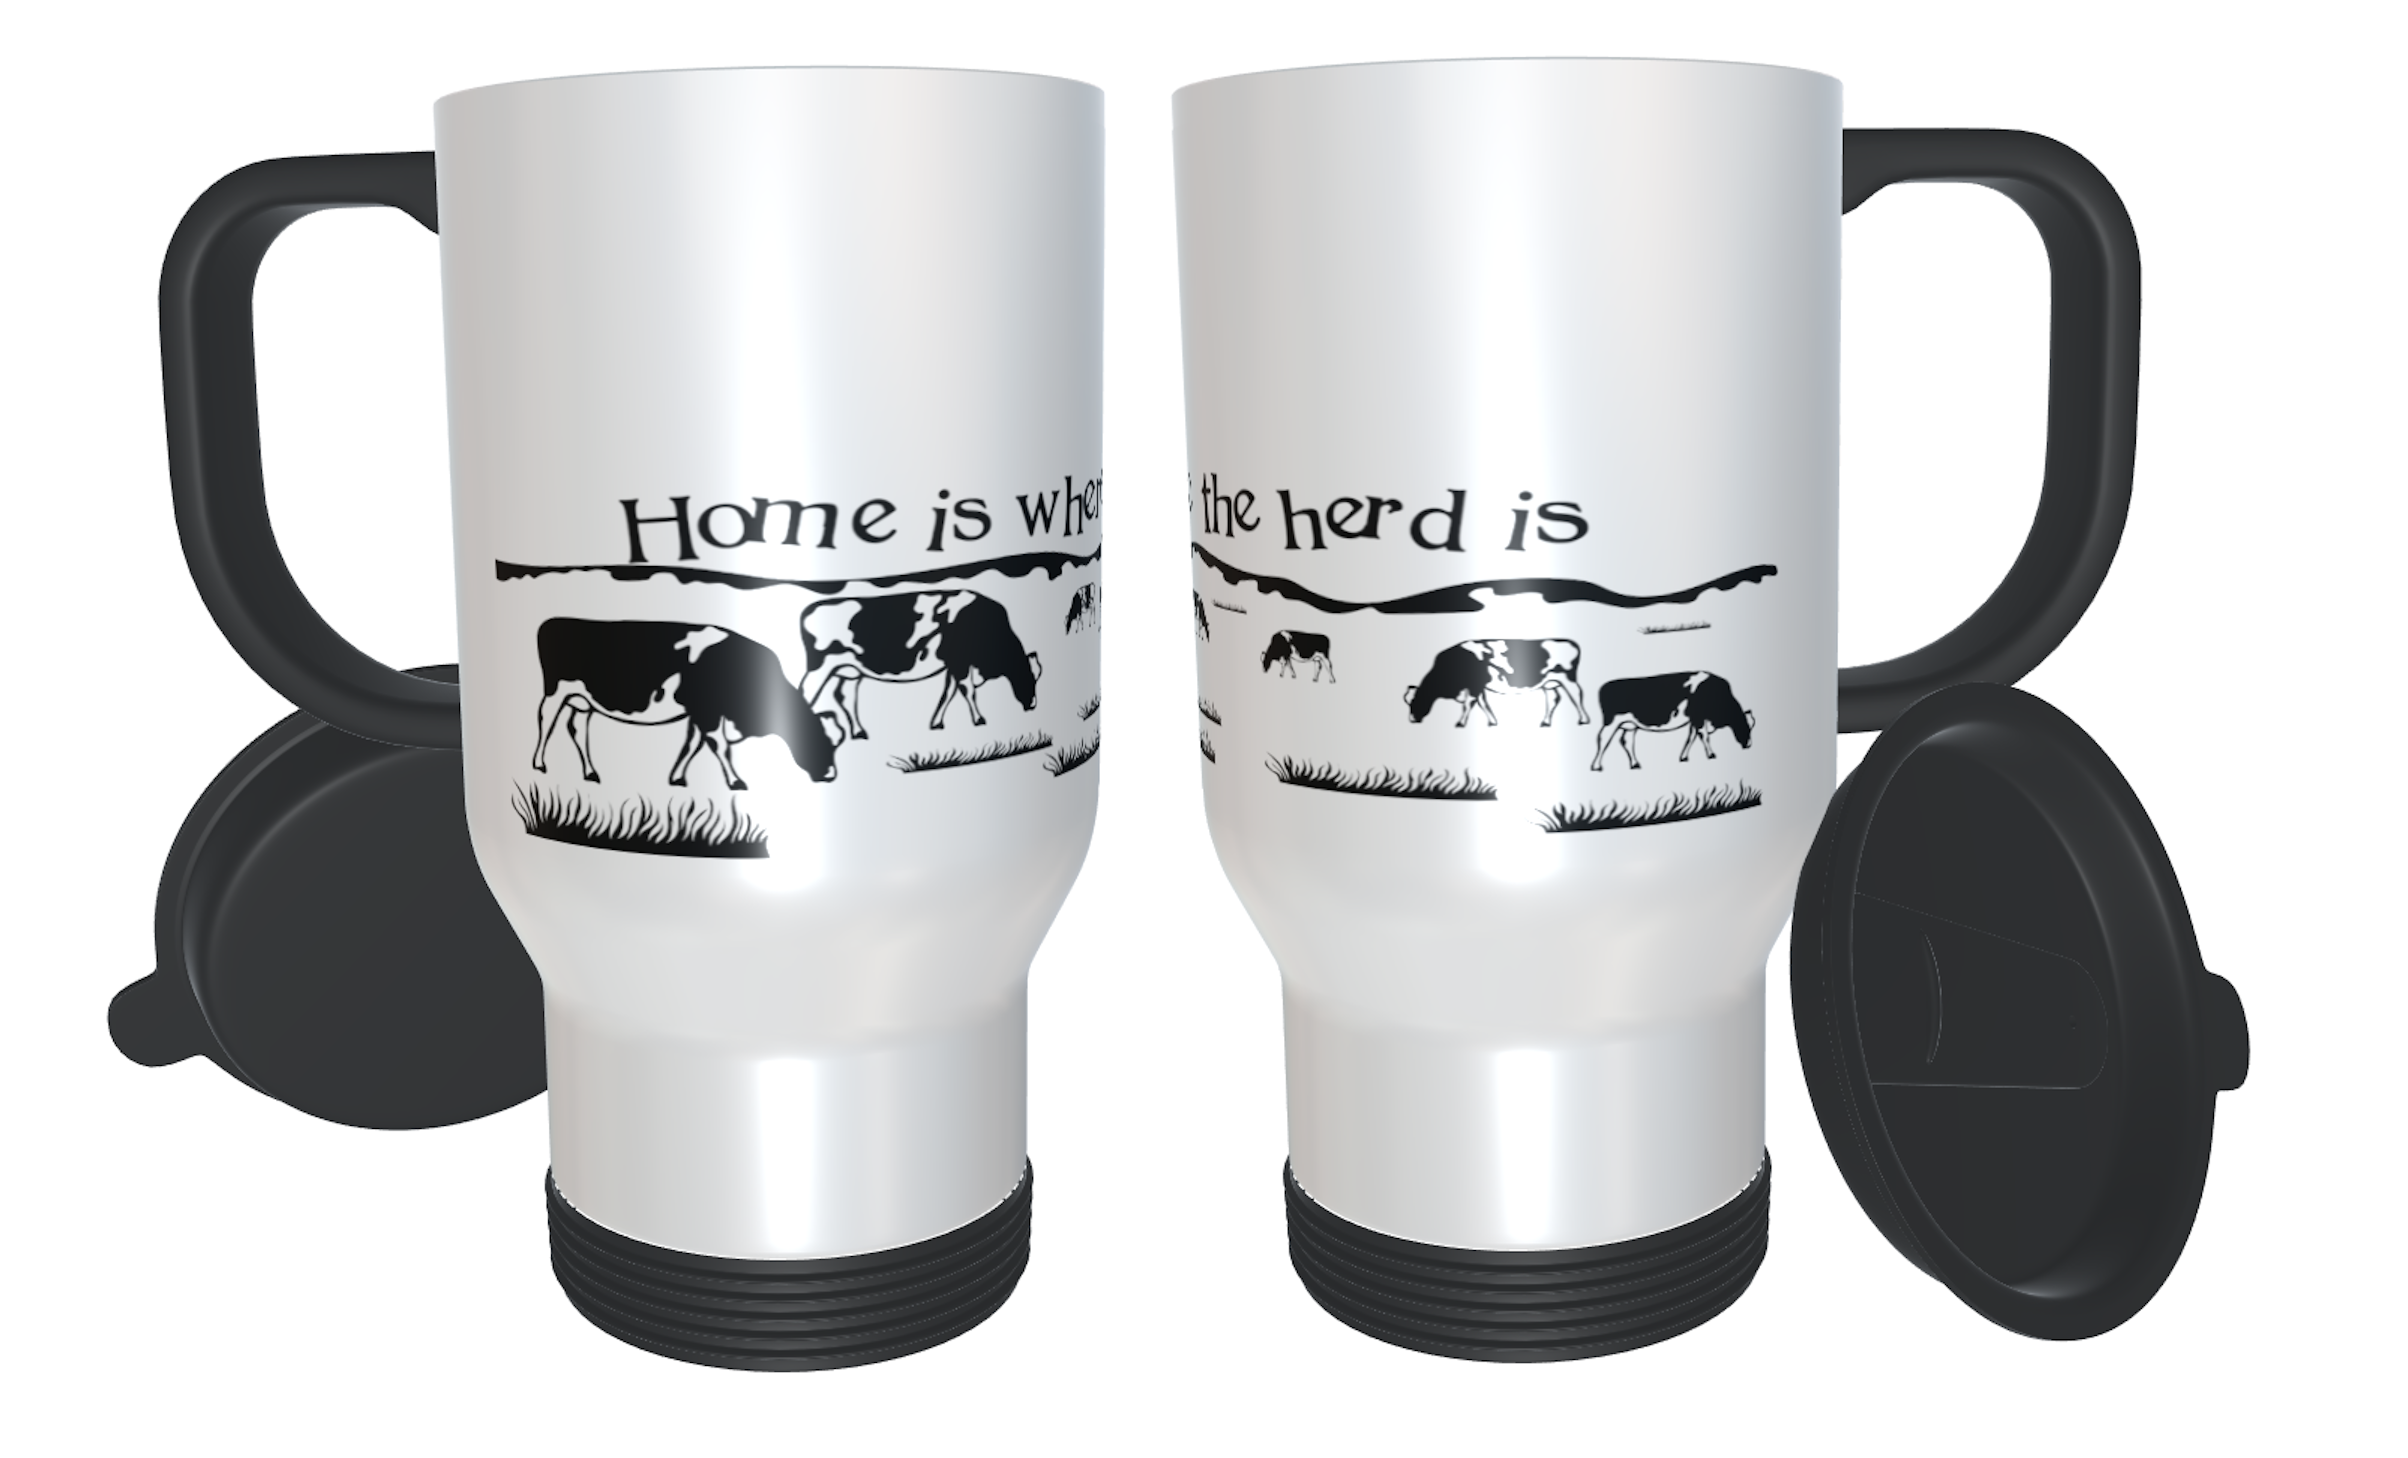 Cow Travel Mug - Home is where the herd is